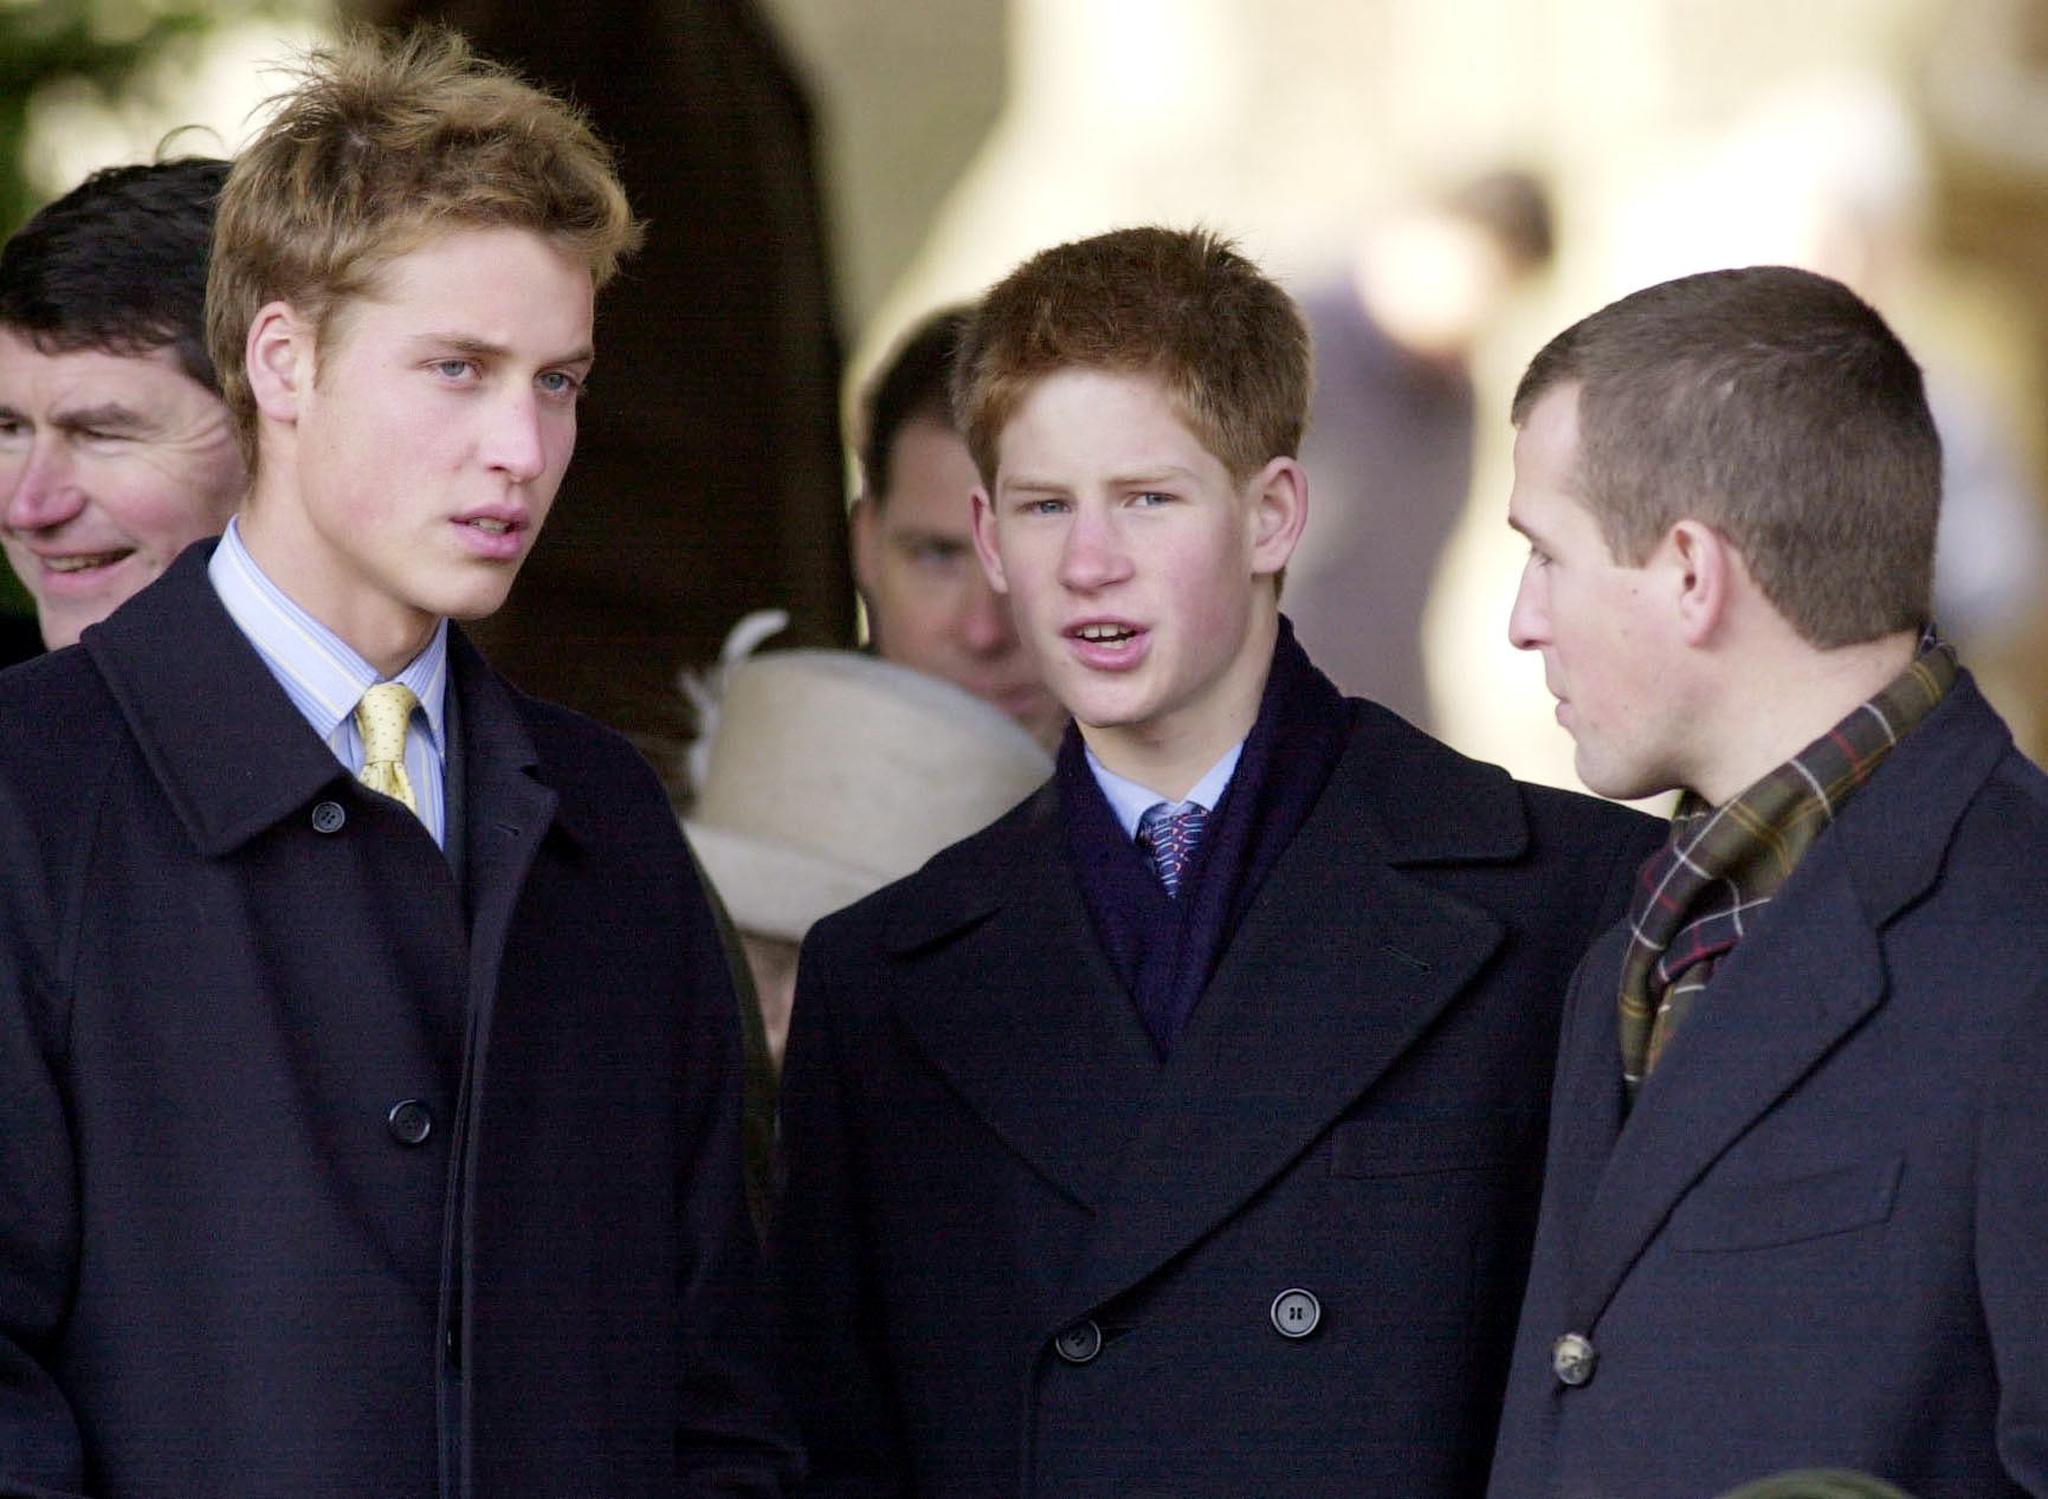 Prince William, his brother Prince Harry and Peter Phillips, son of the Princess Royal, leave St Mary Magdalene Church after Britain's royal family attended a Christmas Day church service in Sandringham, Norfolk, 25 December 2000 | Source: Getty Images 